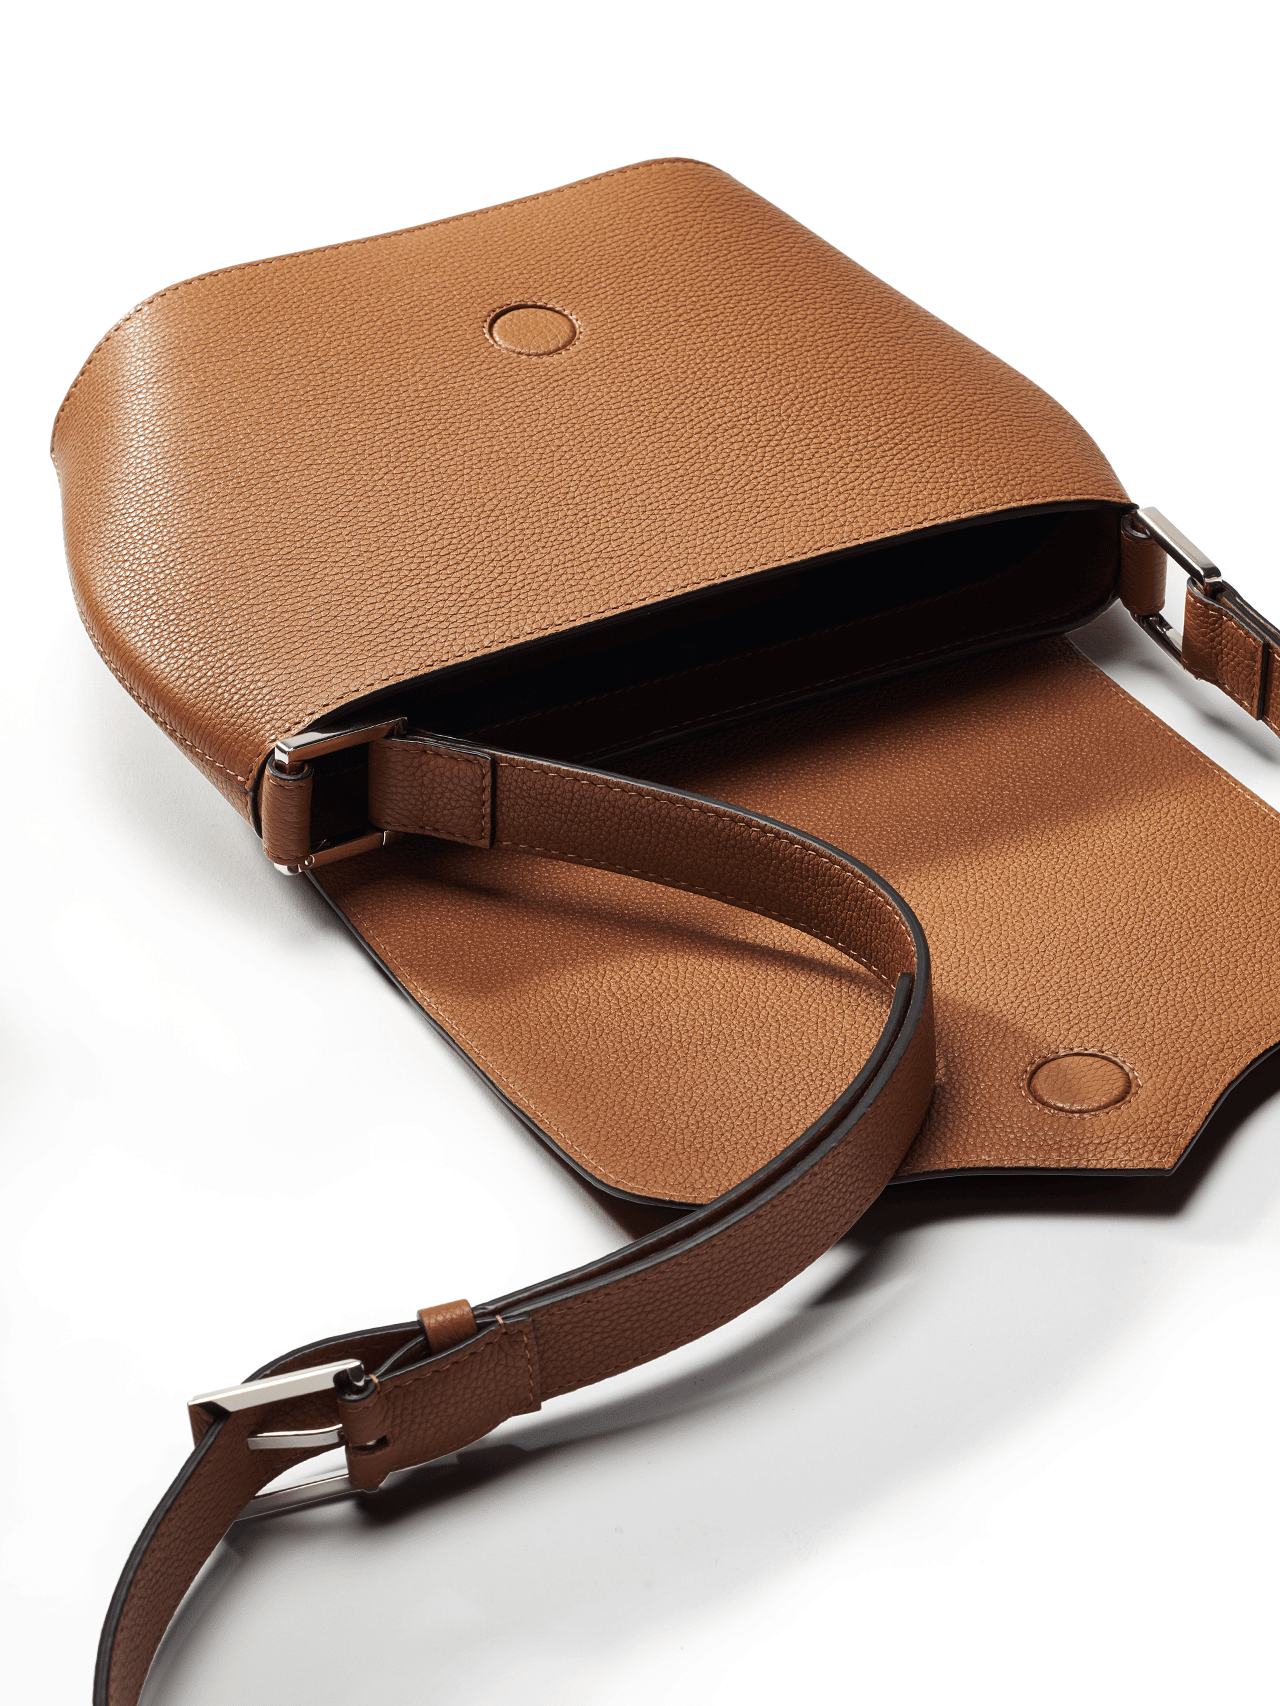 bag leather jean rousseau brown